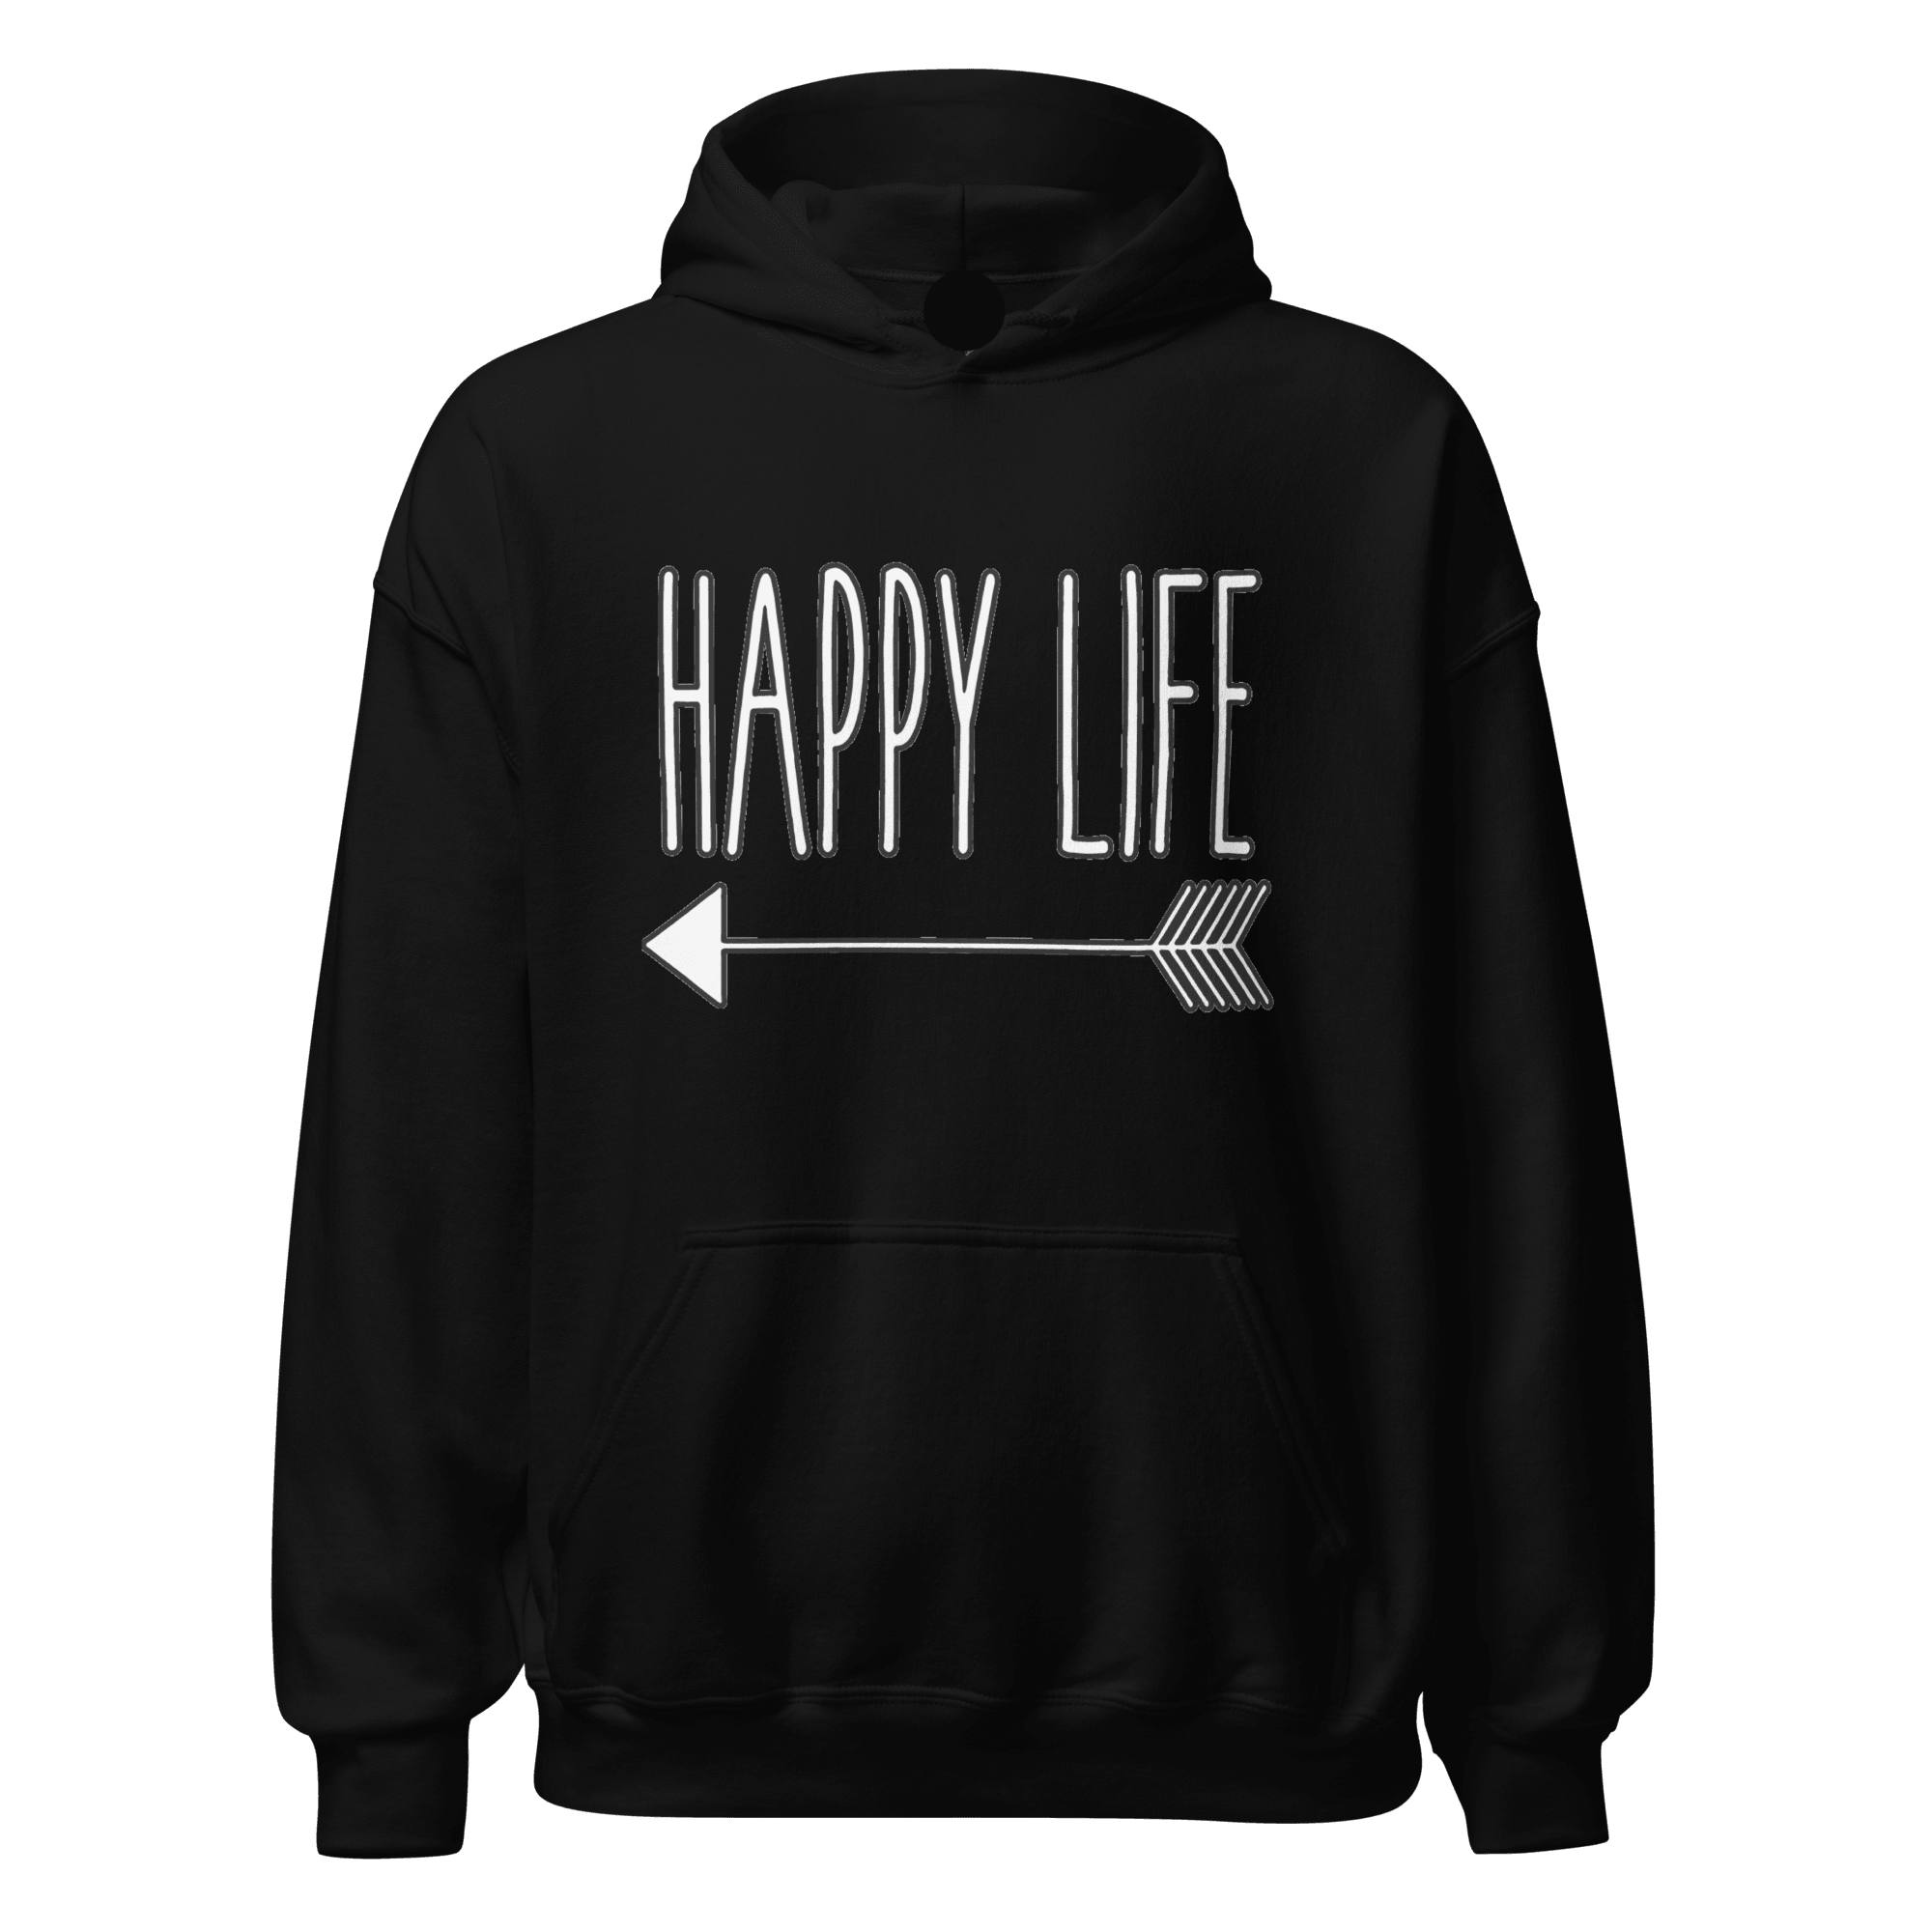 Happy Wife/Happy Life Relationship Hoodie Set Ultra Soft Blended Cotton Midweight Pullovers - TopKoalaTee